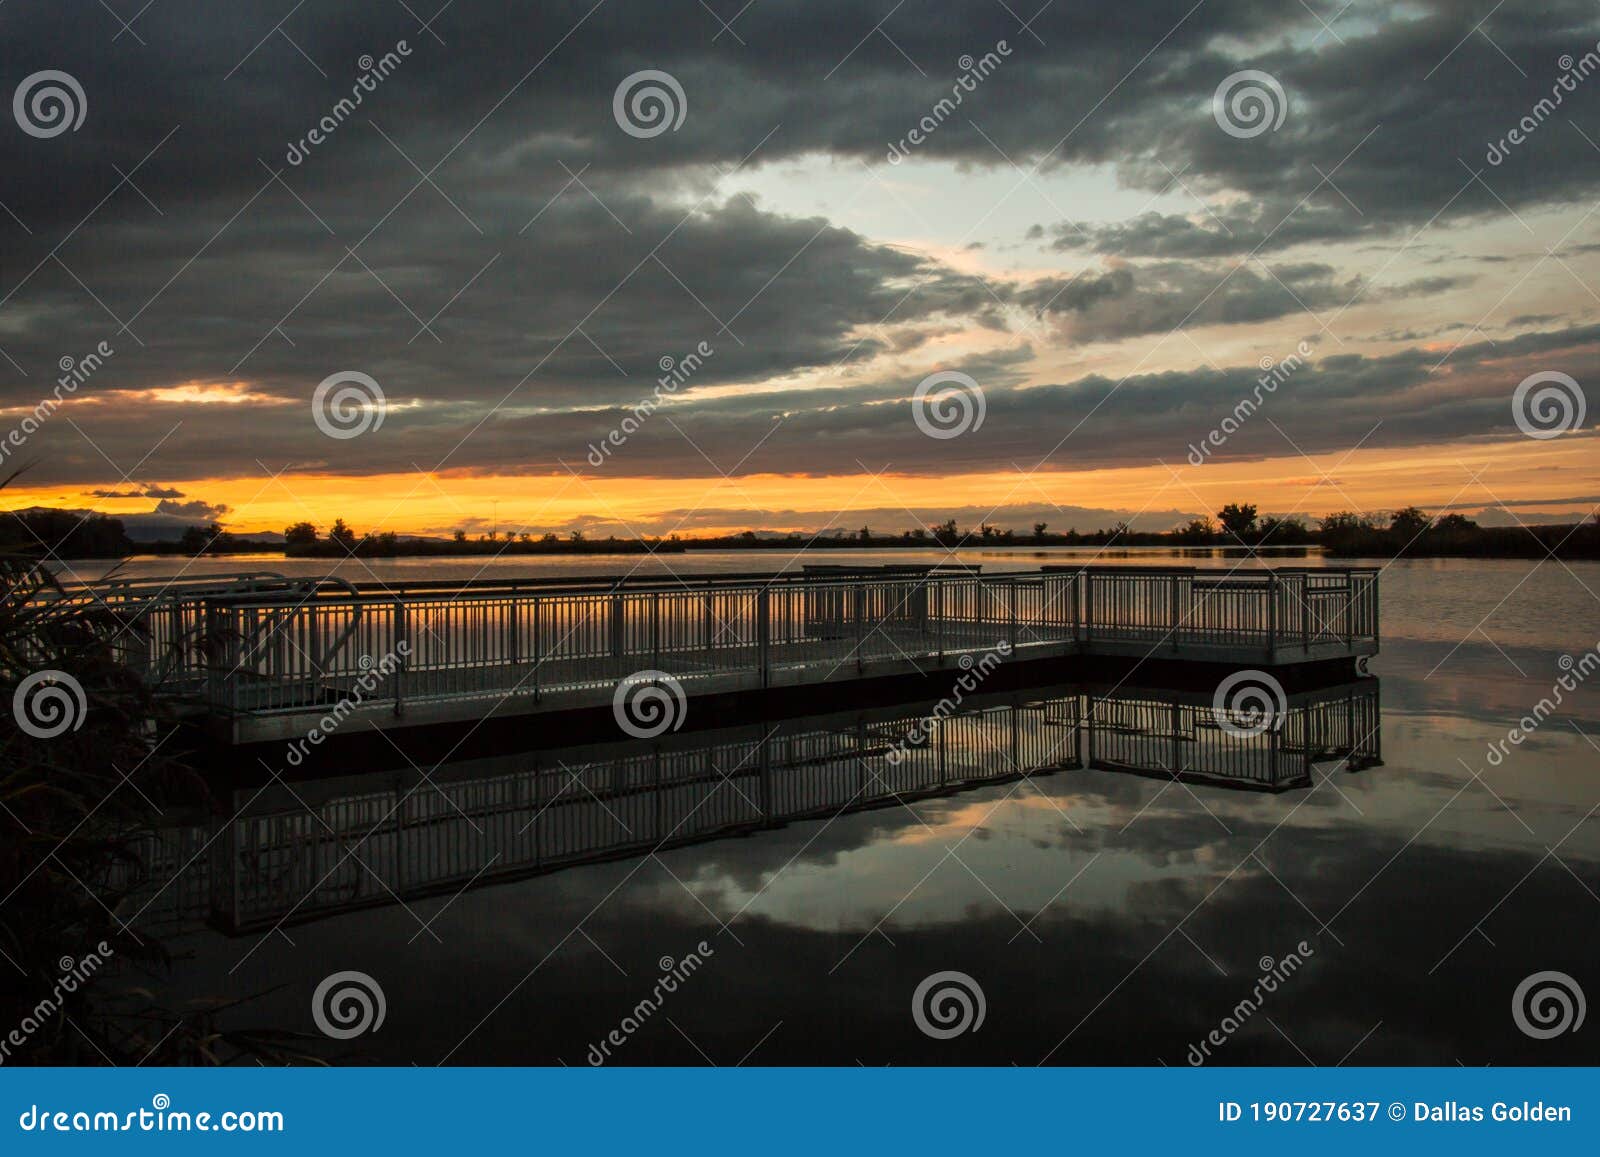 Sunset On Lake With Dock Stock Image Image Of Calm 190727637